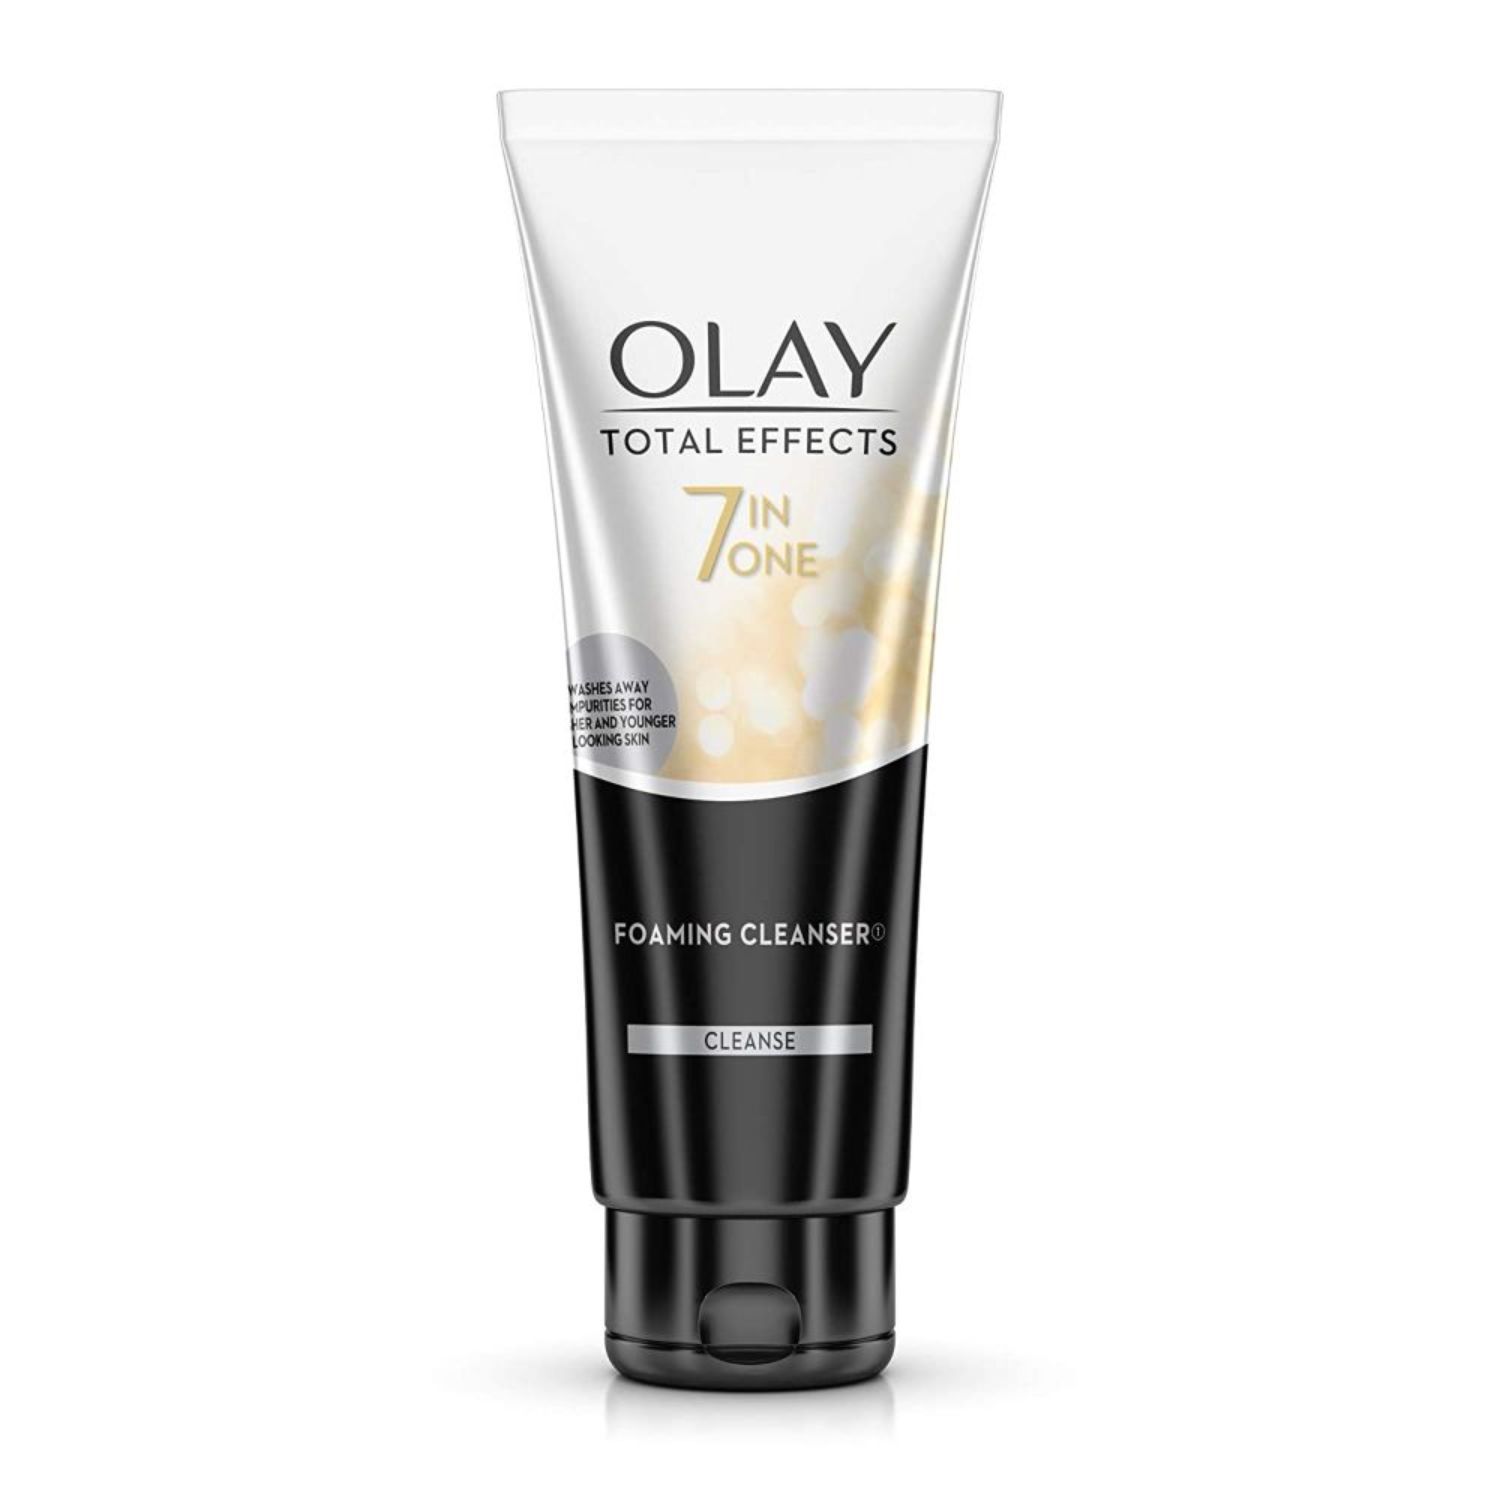 Buy Olay Total Effects 7 In One Foaming Cleanser Cleanse (100 g) - Purplle